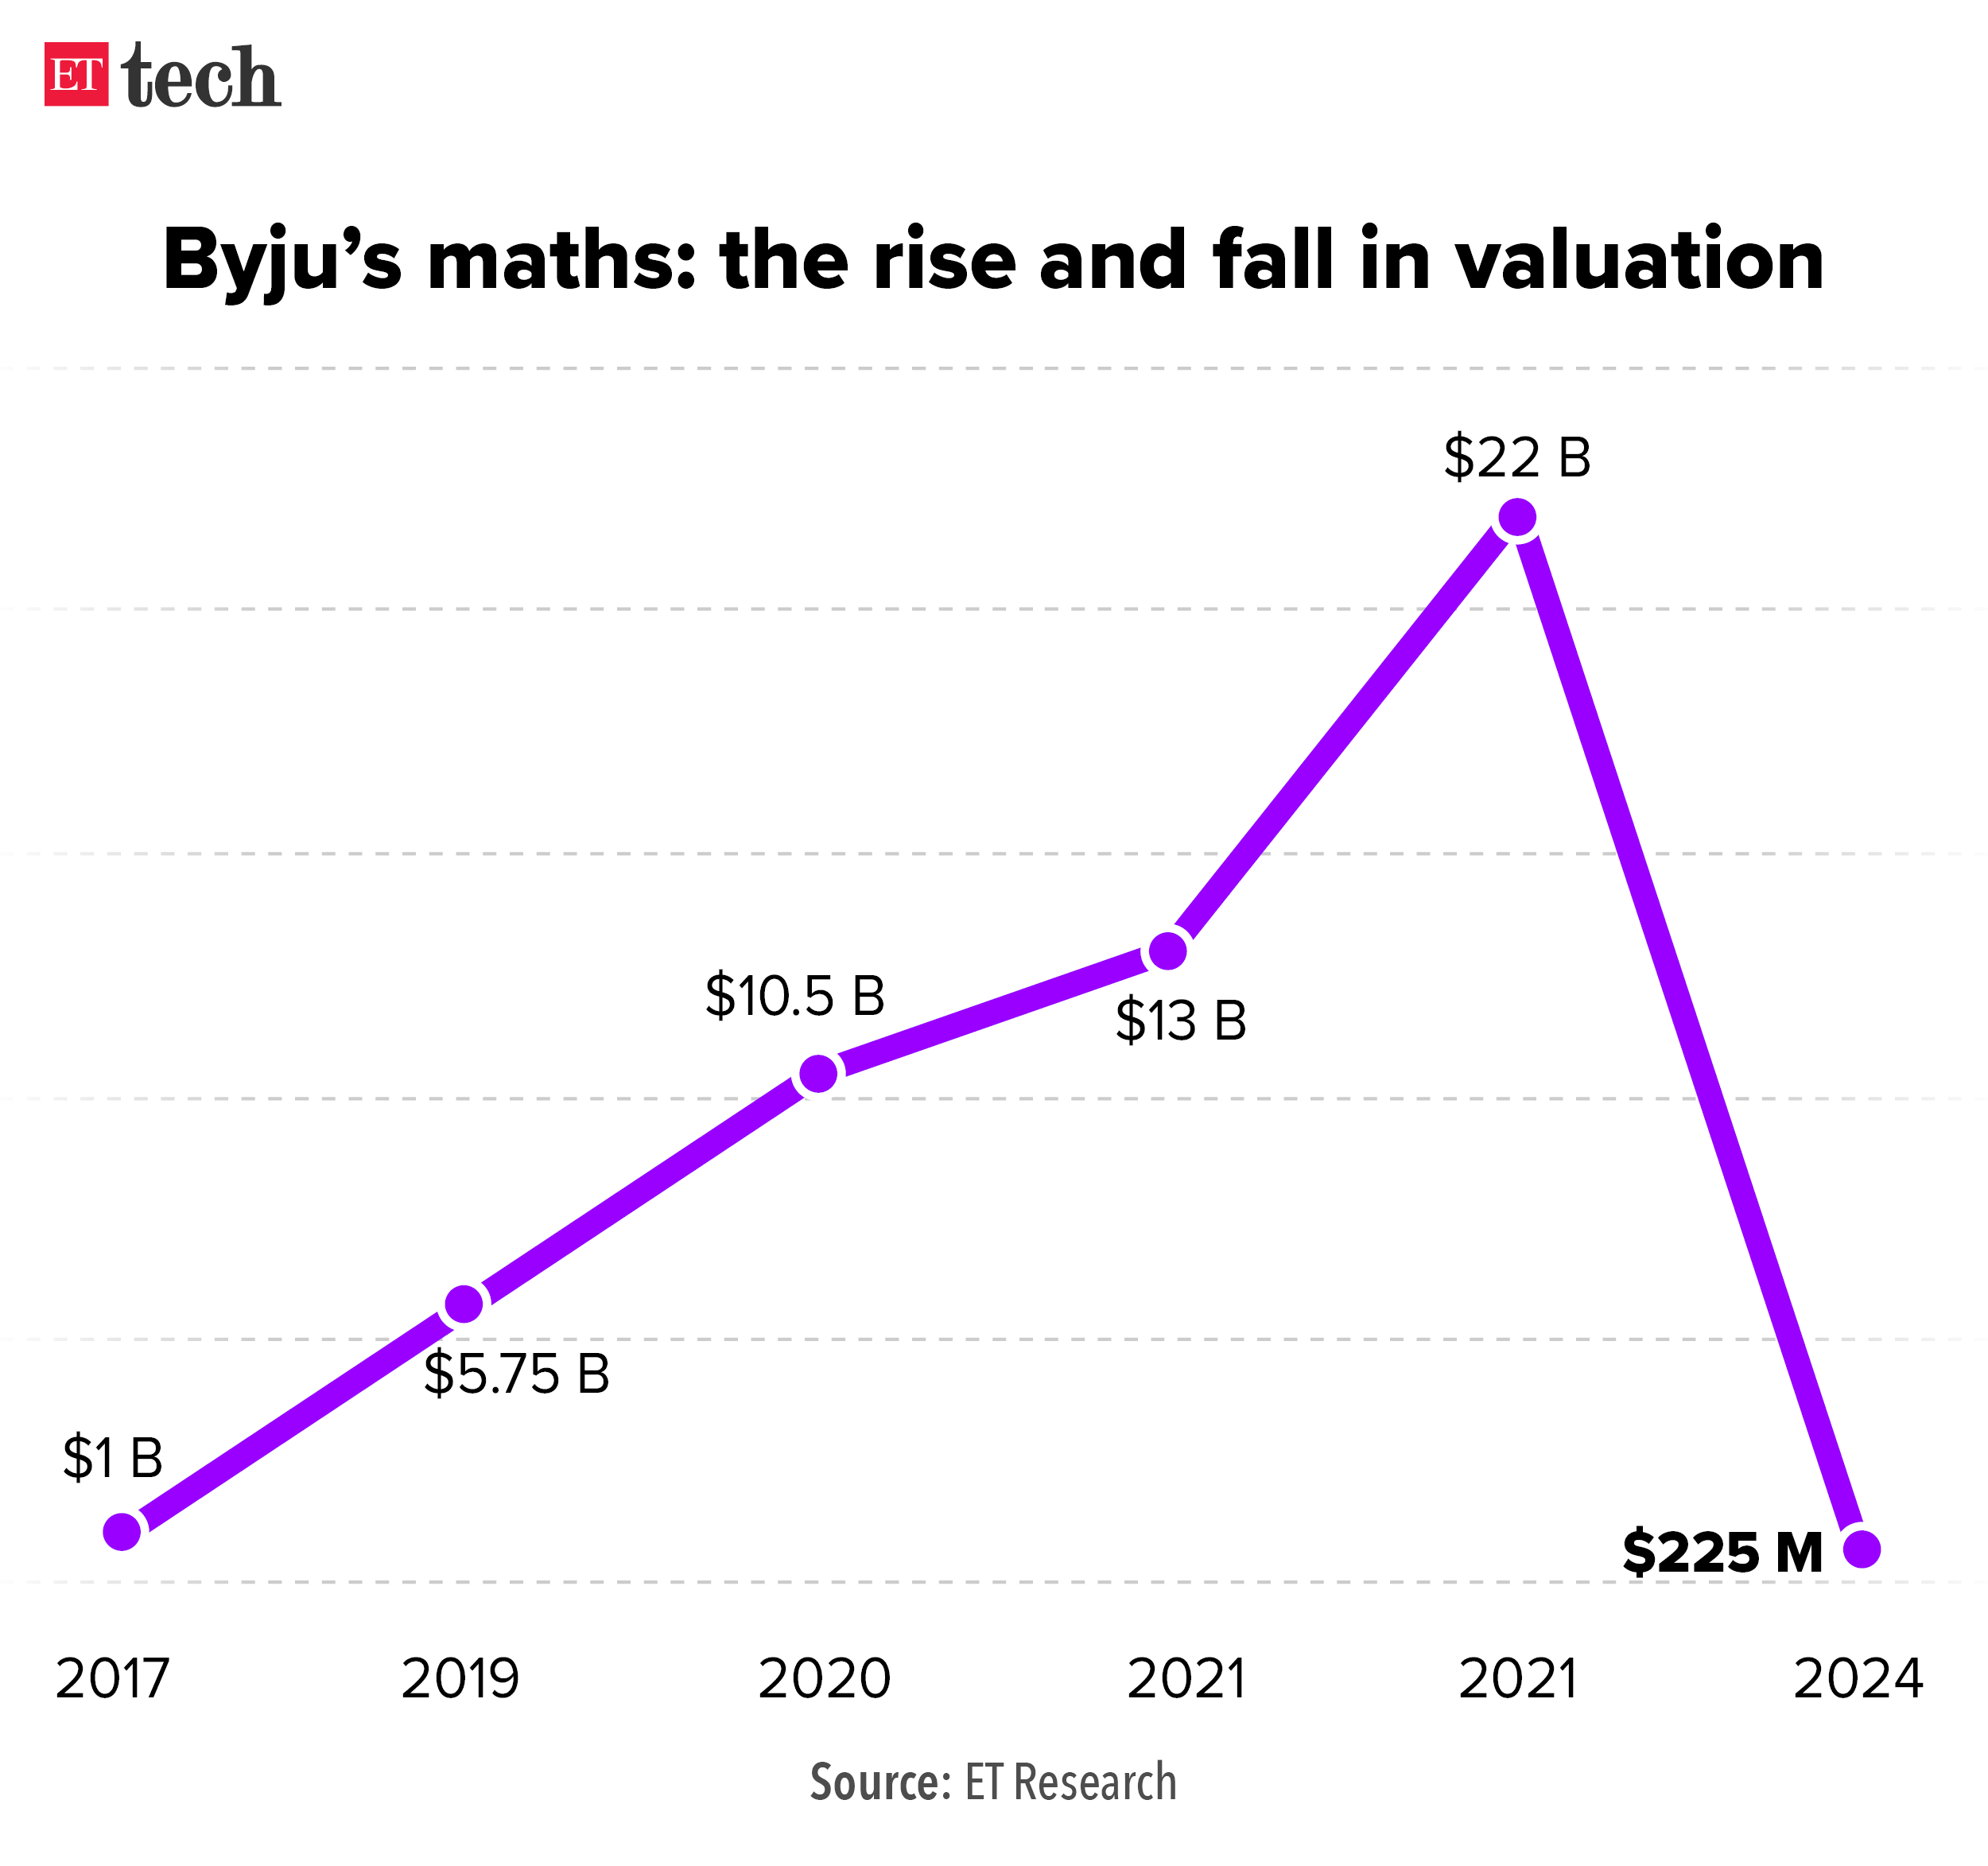 Byju maths the rise and fall in valuation_Jan 2024_Graphic_ETTECH (1)